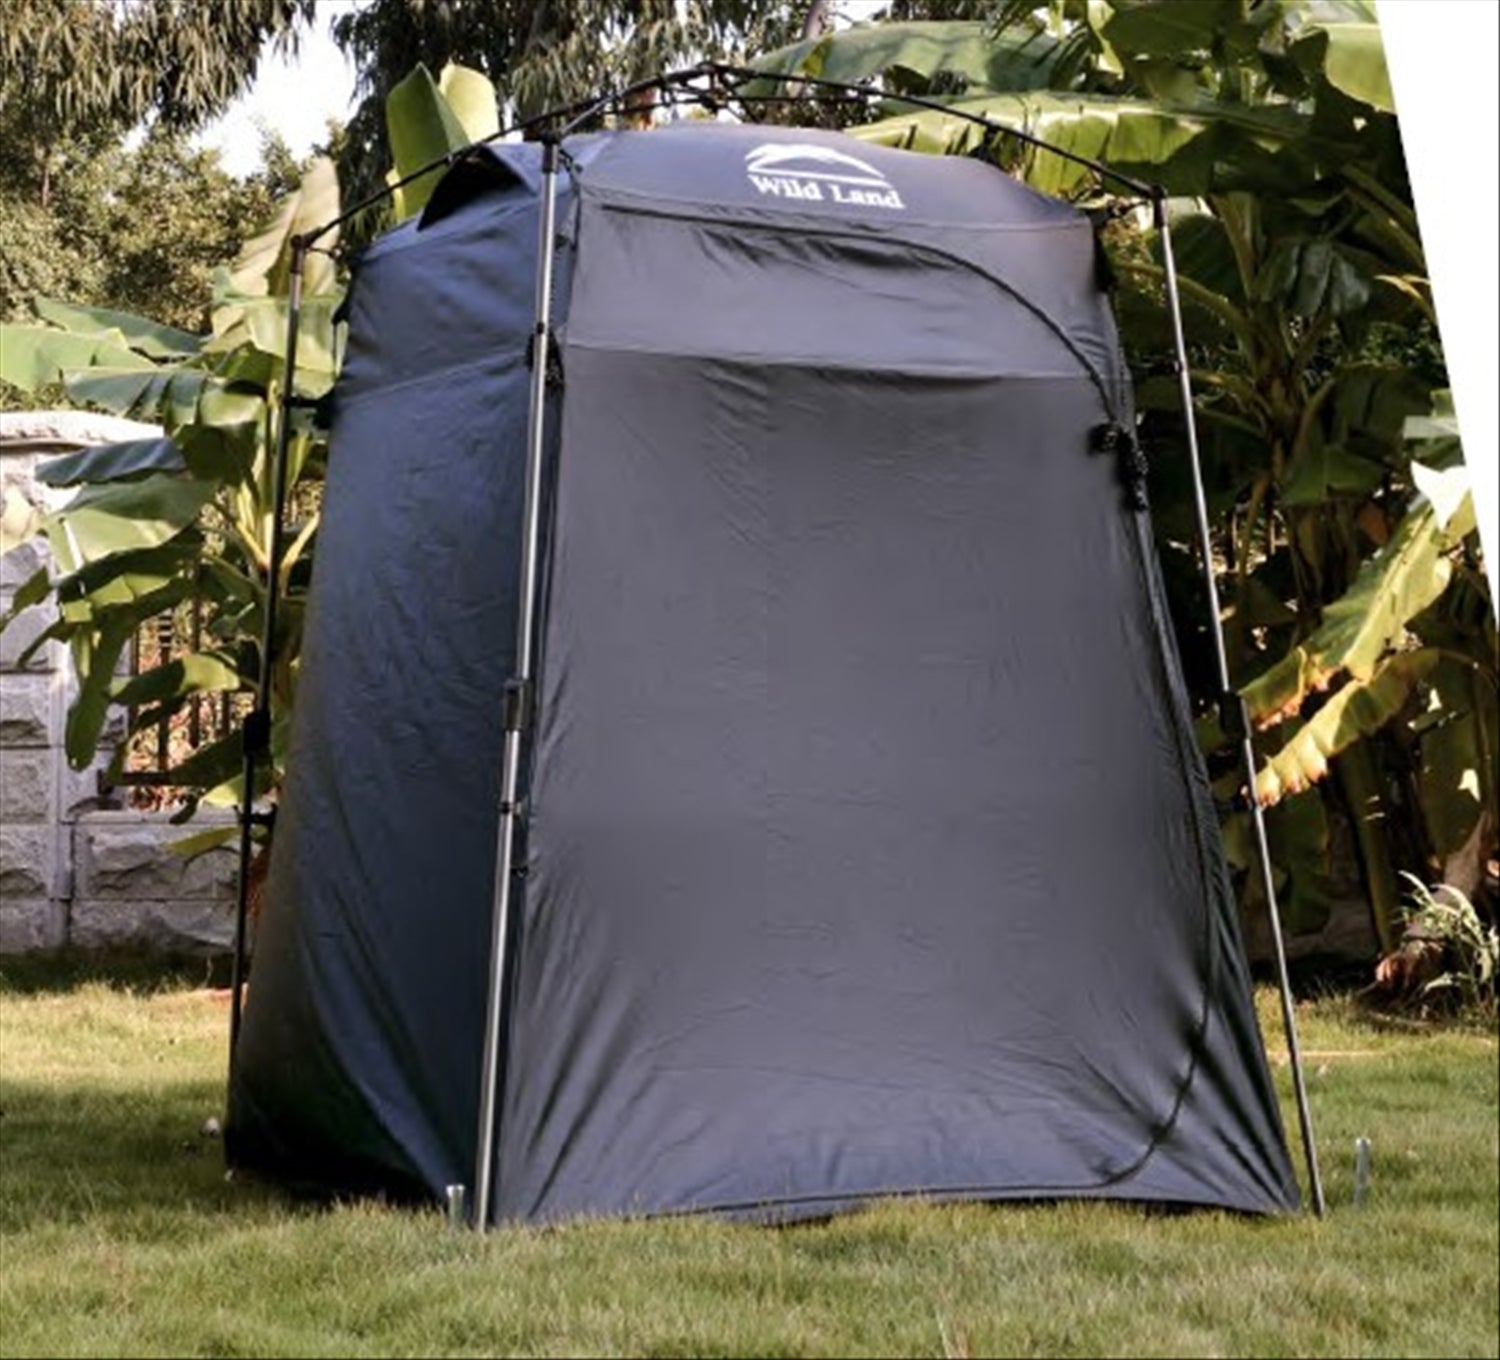 Wild Land Wild Land Shower - Changing Tent with easy pitch Auto-Up System